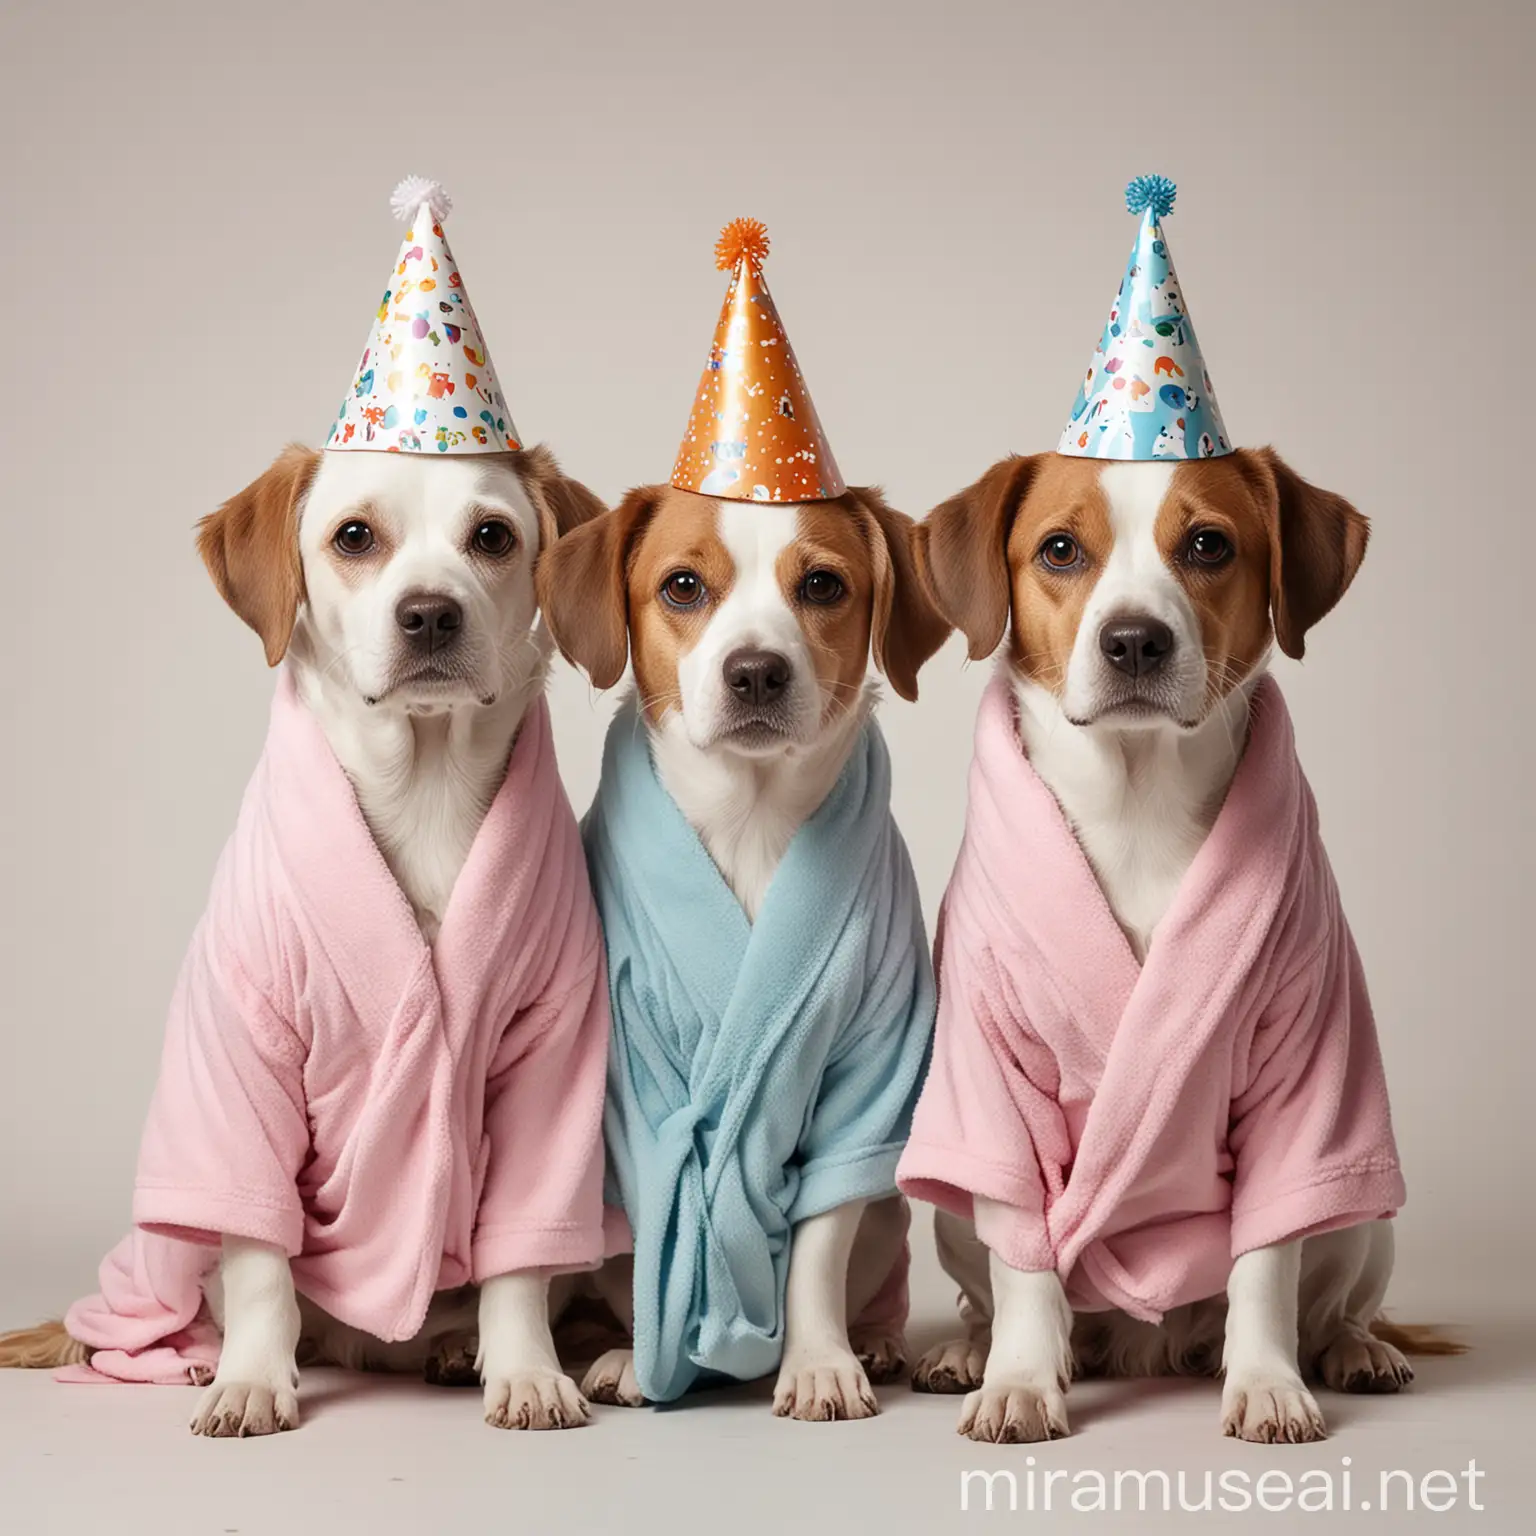 Festive Salon Grand Opening Dogs in Party Hats and Bathrobes